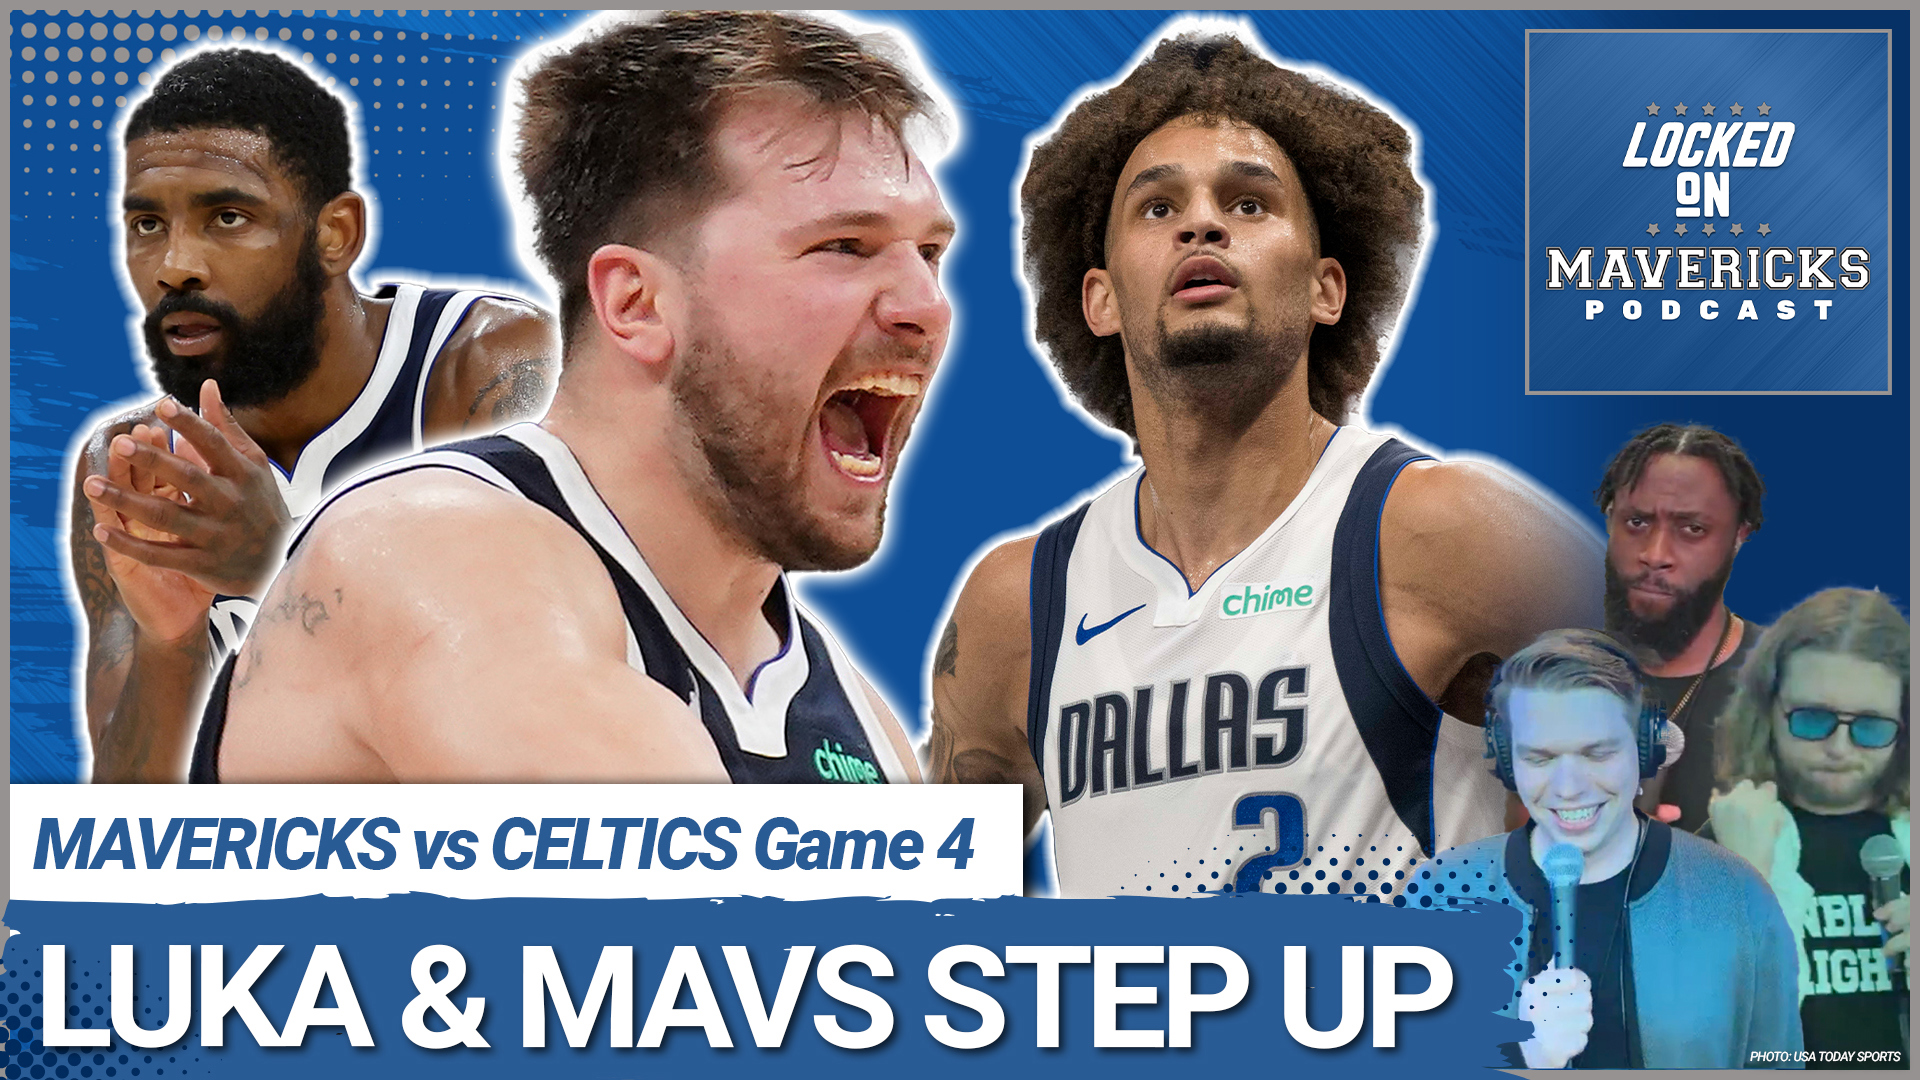 Nick Angstadt, Slightly Biased, & Reggie Adetula react to the Dallas Mavericks win in Game 4 against the Boston Celtics and how Luka Doncic stepped up.